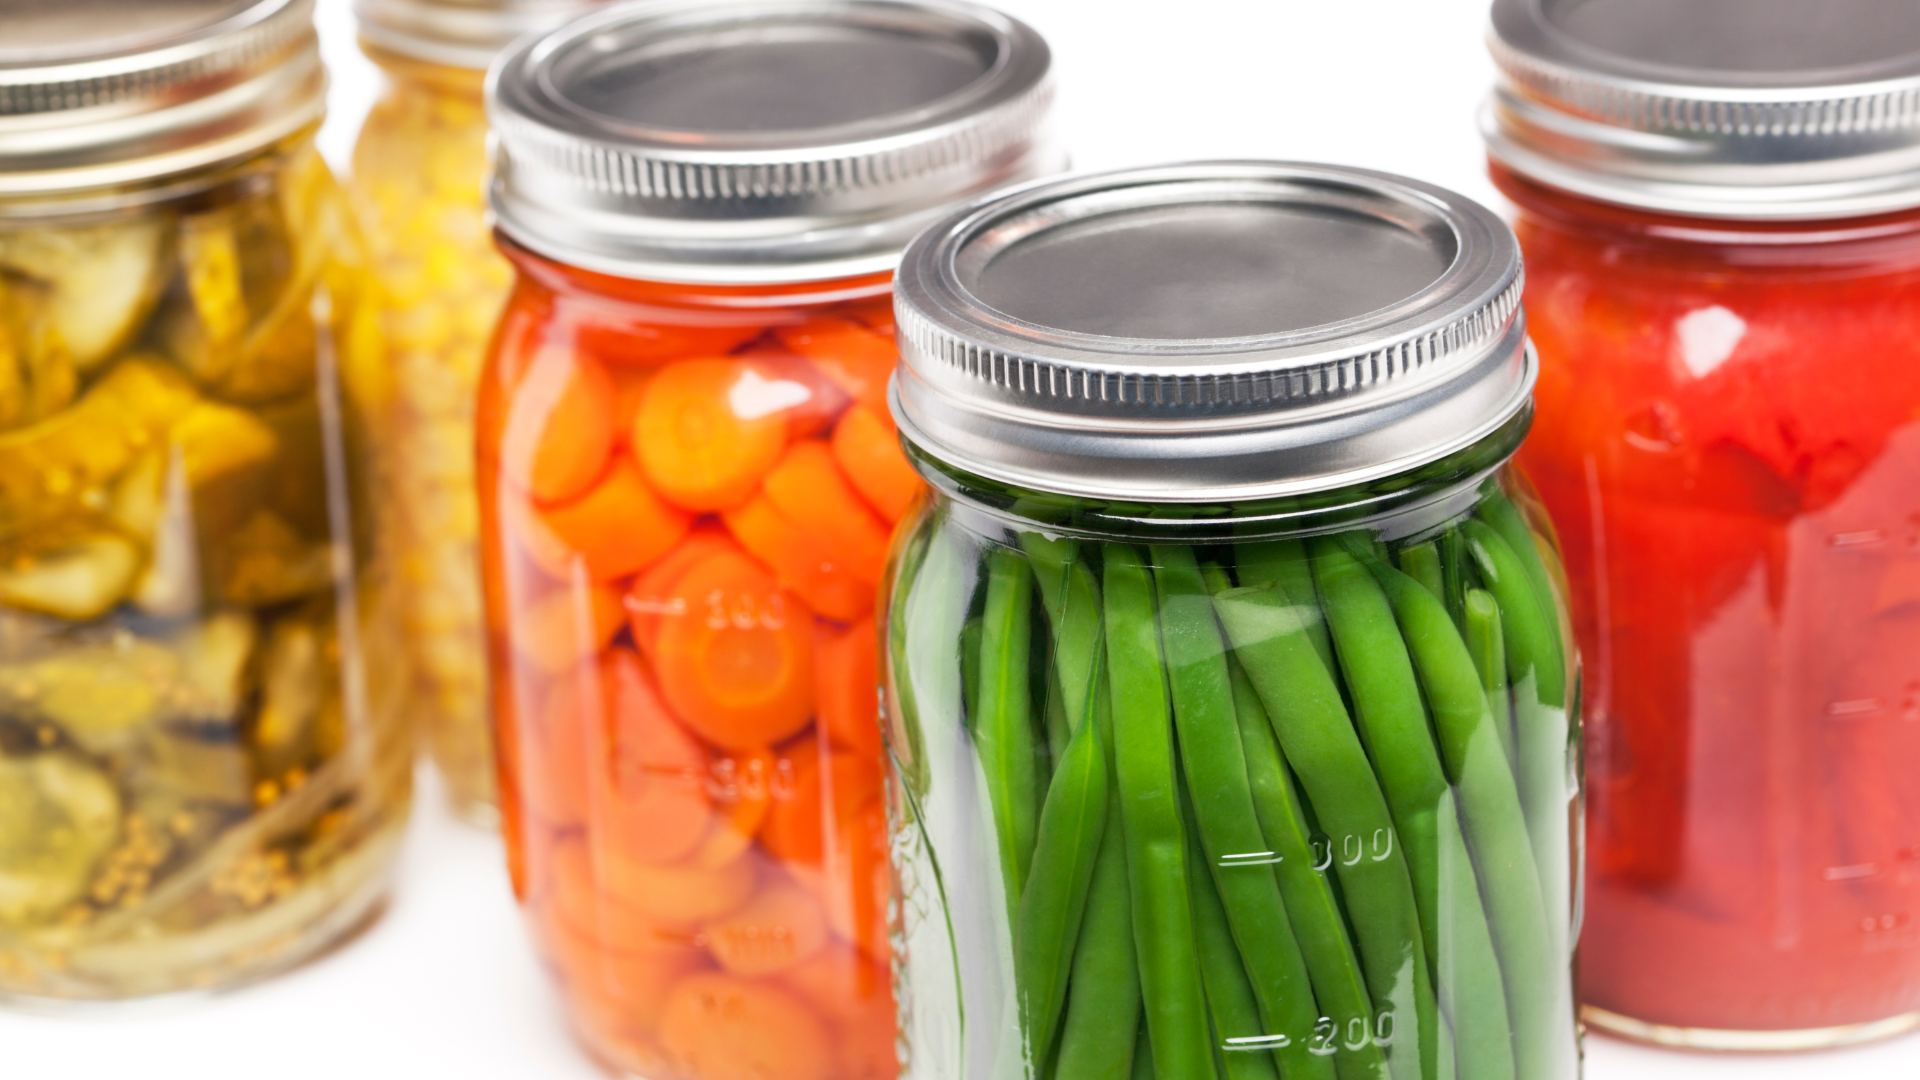 Jars of canned green beans, carrots, tomatoes, cucumbers and corn